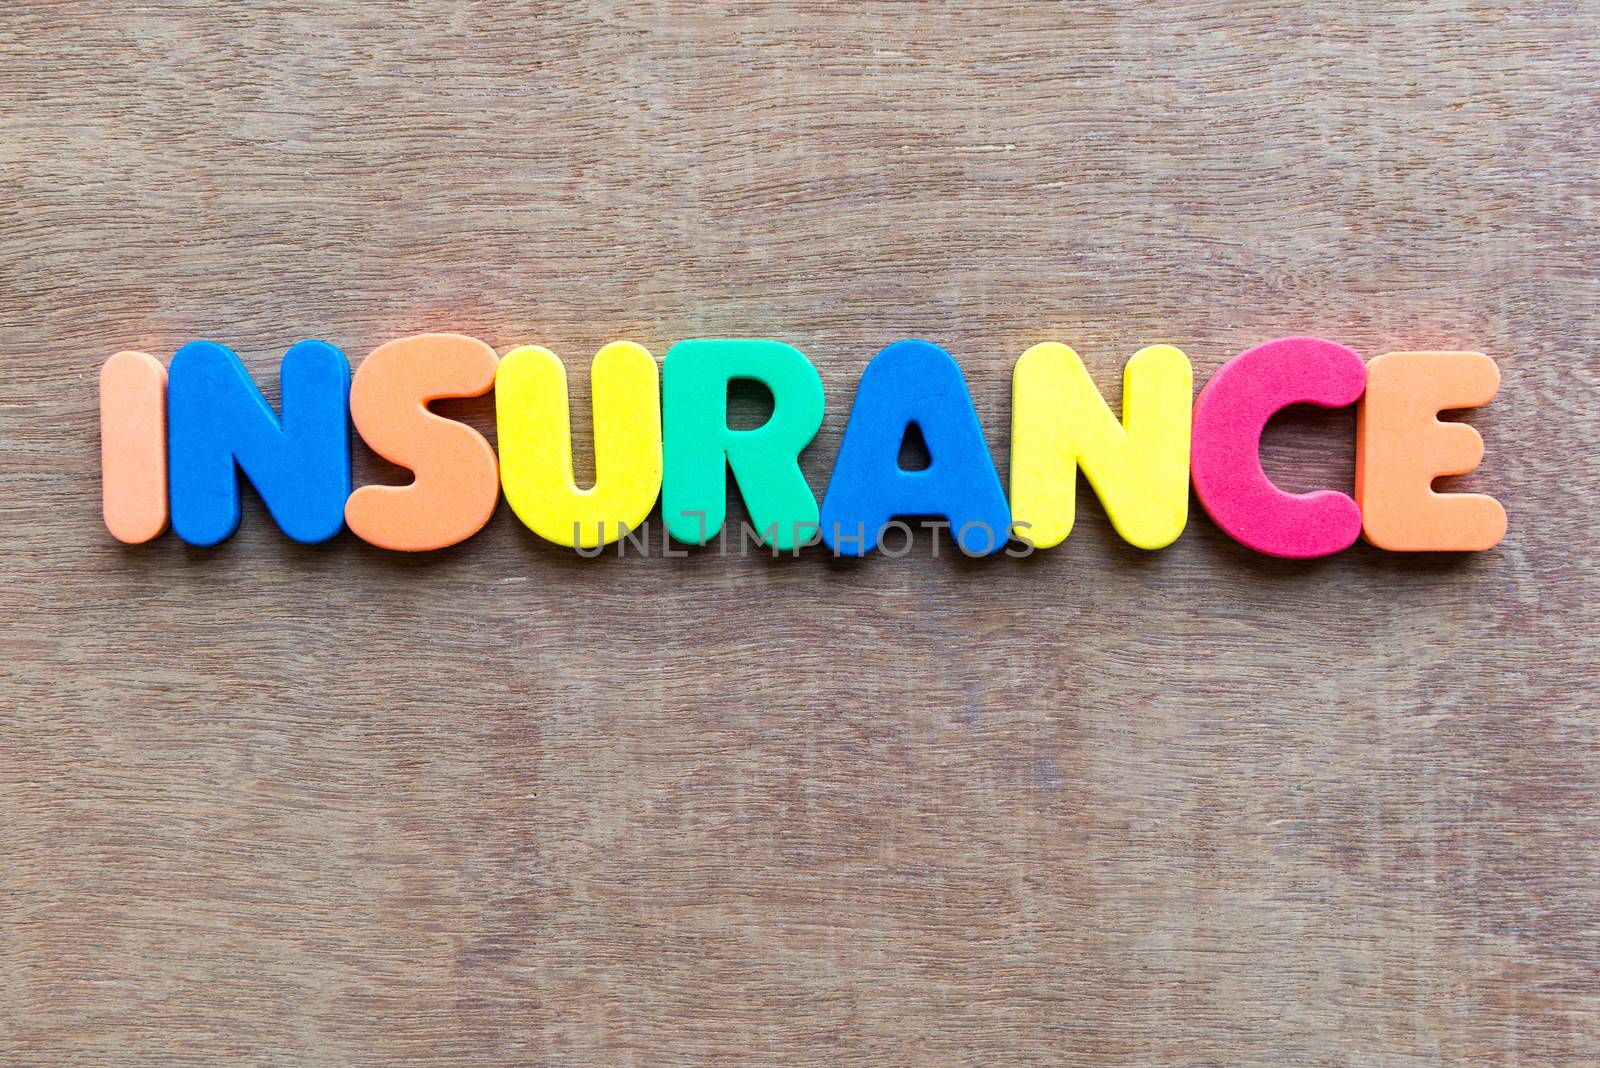 insurance colorful word in the wooden background